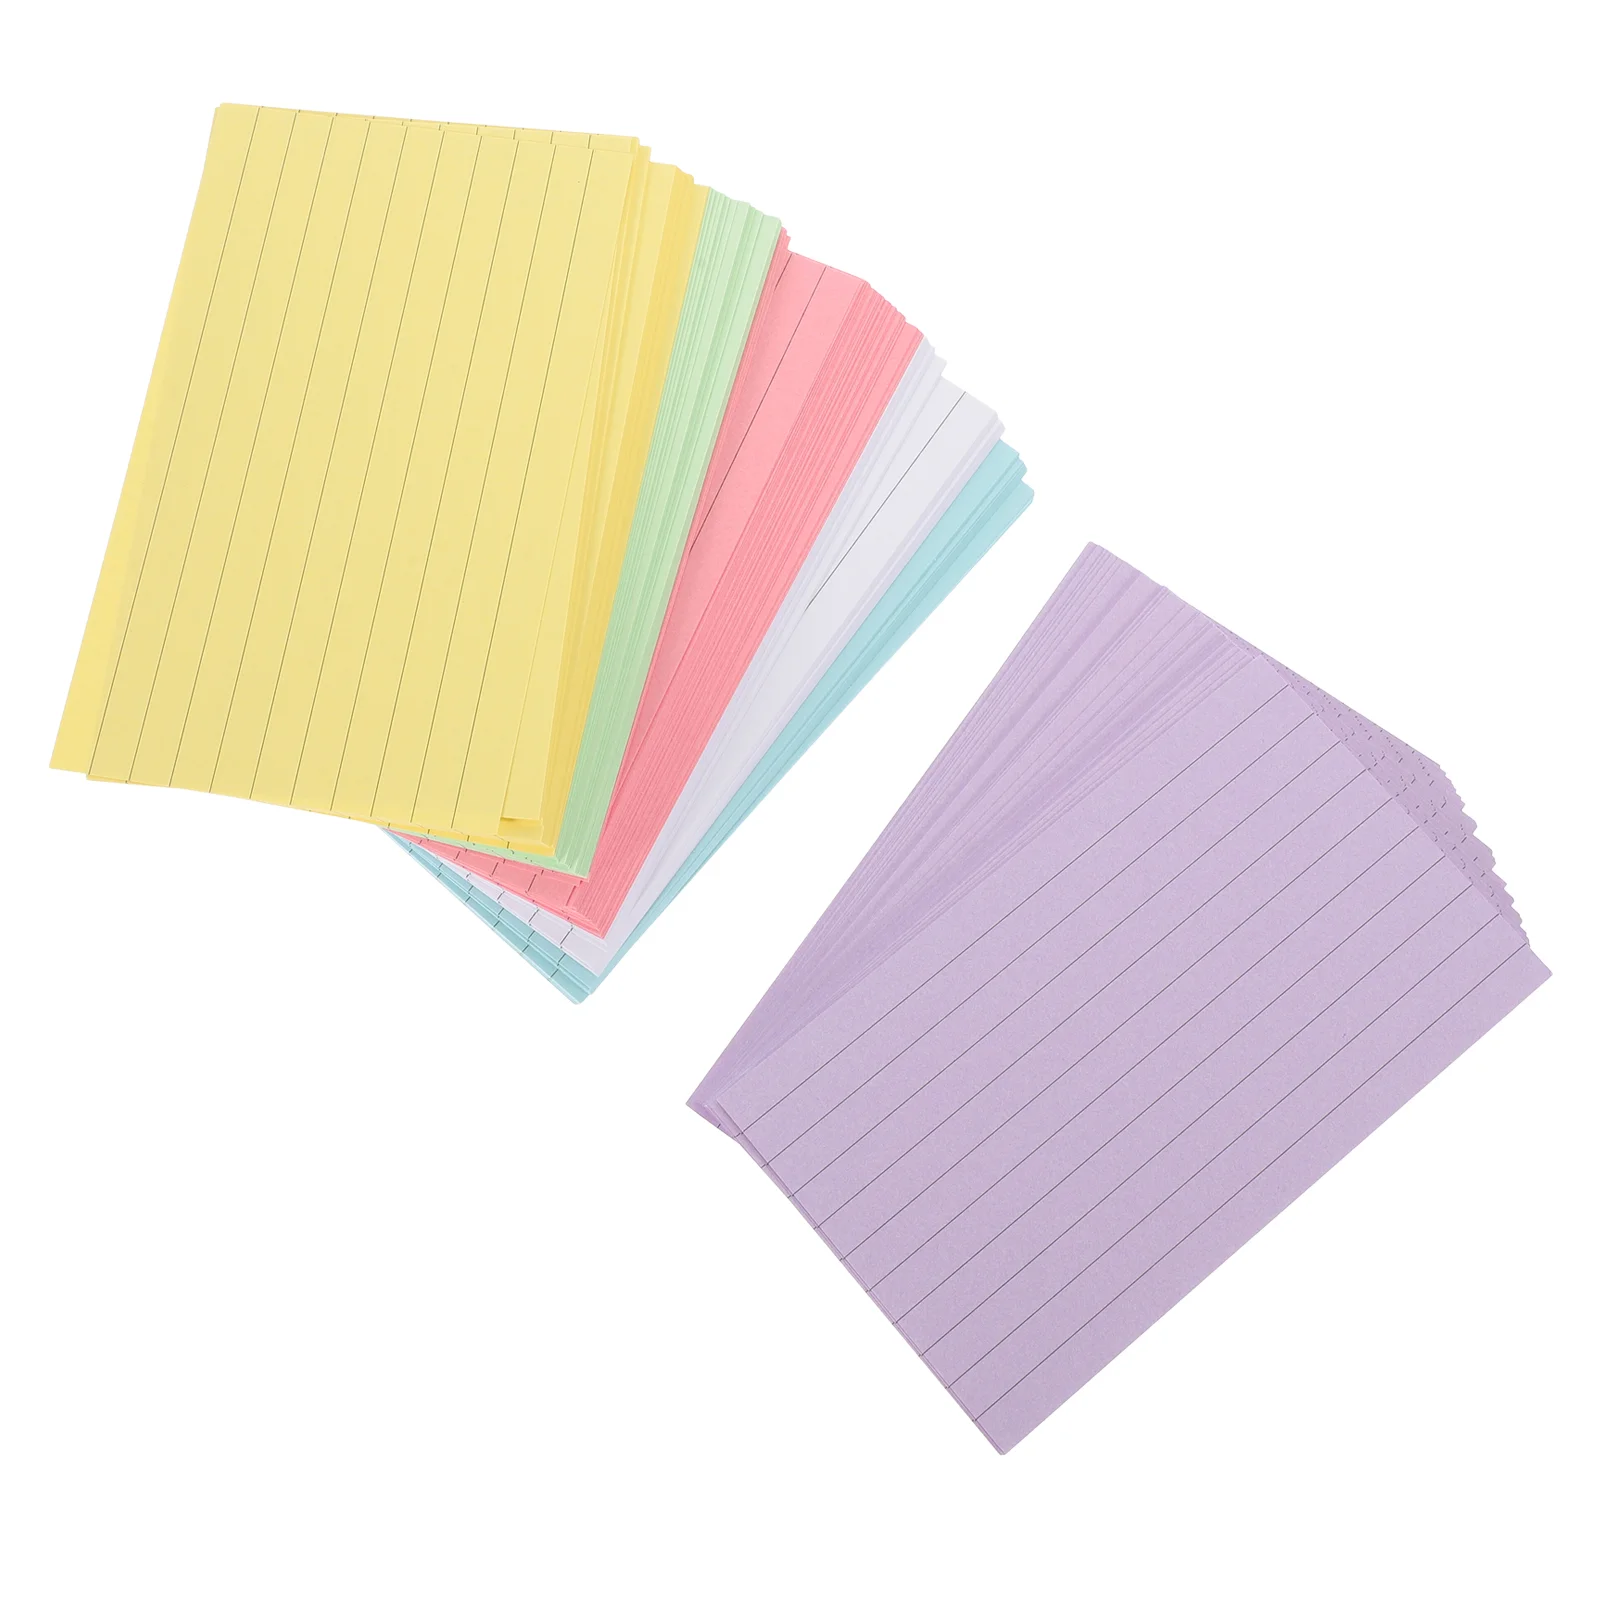 300 Sheets Index Cards Flash Cards Colored Note Cards Portable Writing Words Cards Office Supplies